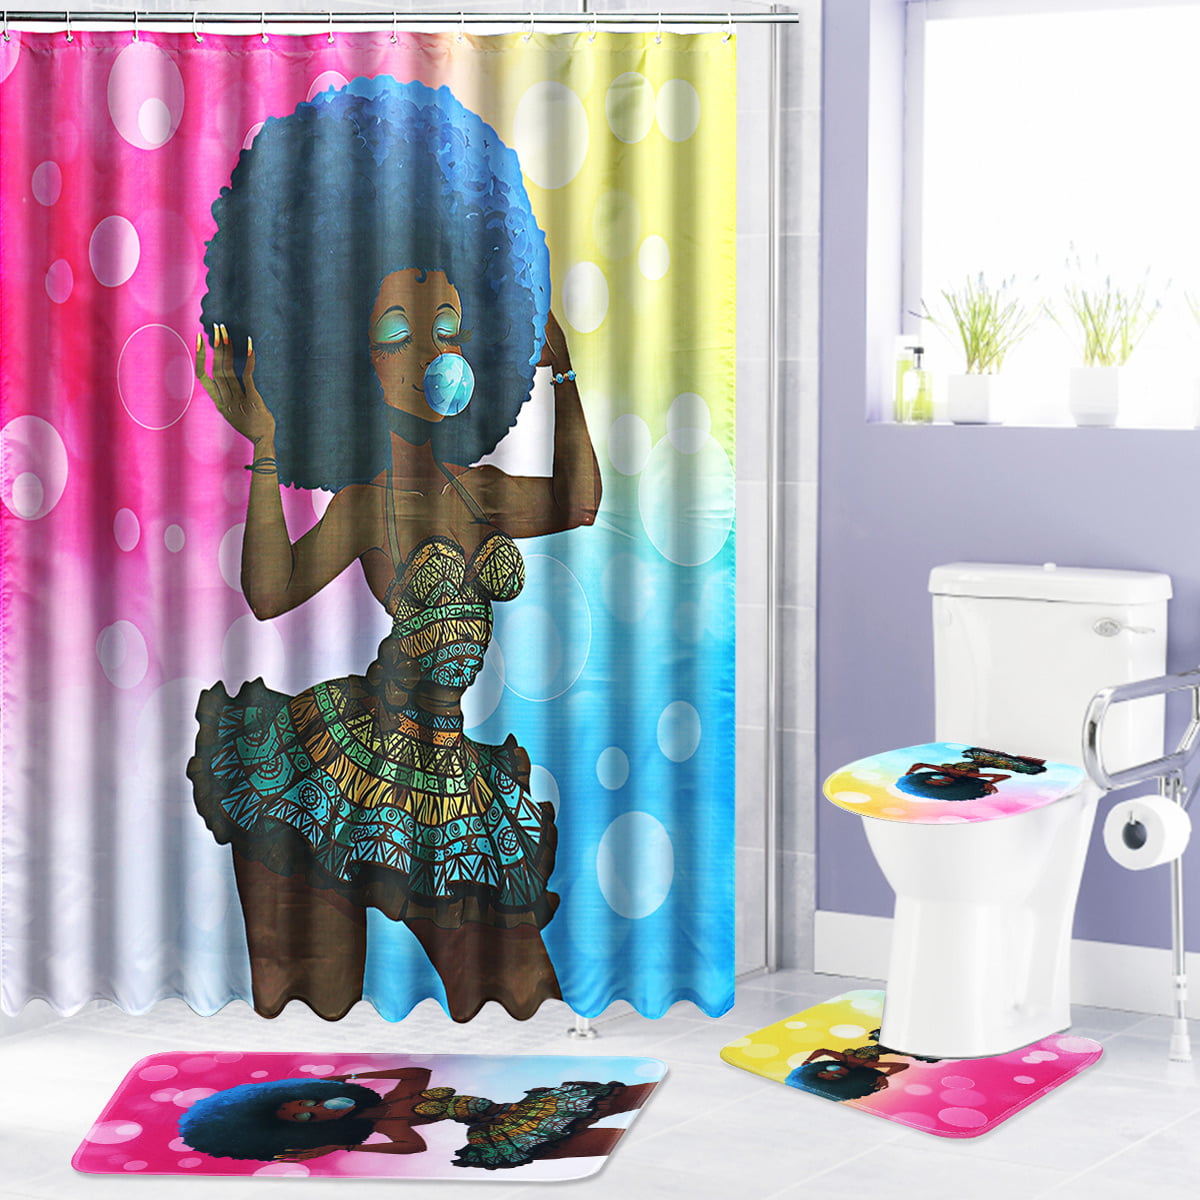 Details about   African Women Shower Curtain Art Afro Girl Fabric Shower Curtain Set with Hooks 